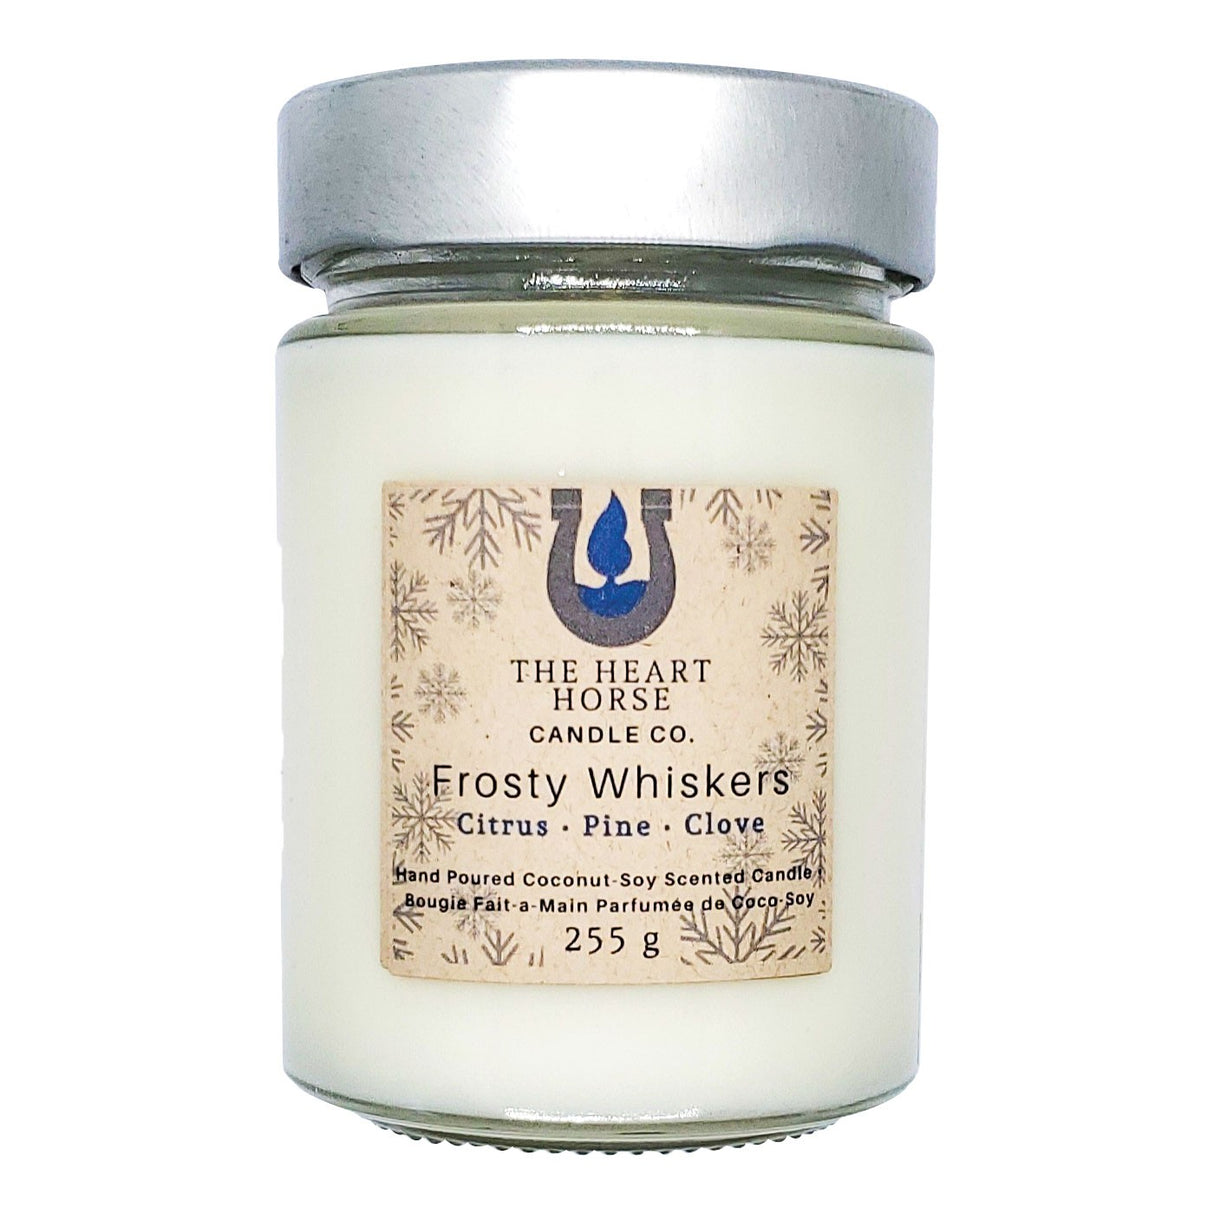 The Heart Horse Candle Co. Frosty Whiskers Candle